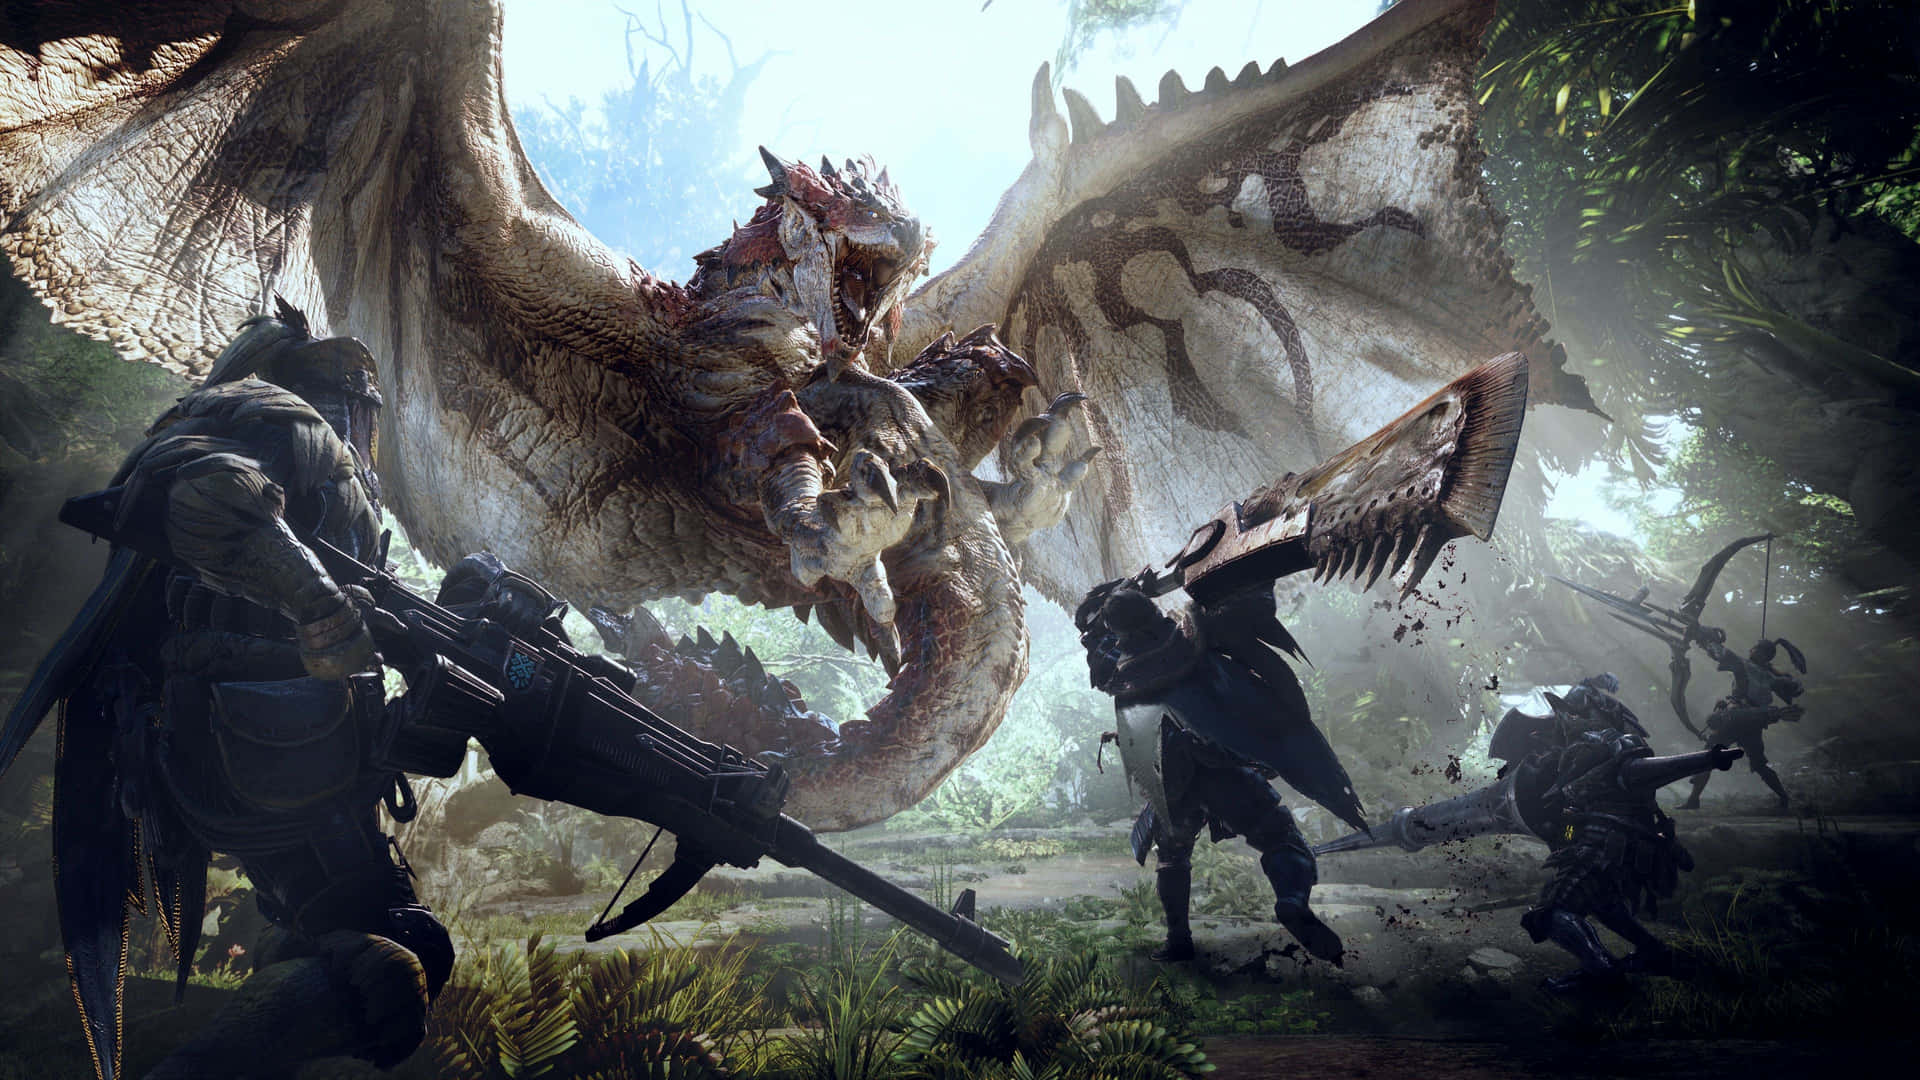 Join forces with your hunter friends and take down the fiercest monsters in Monster Hunter 3 Wallpaper